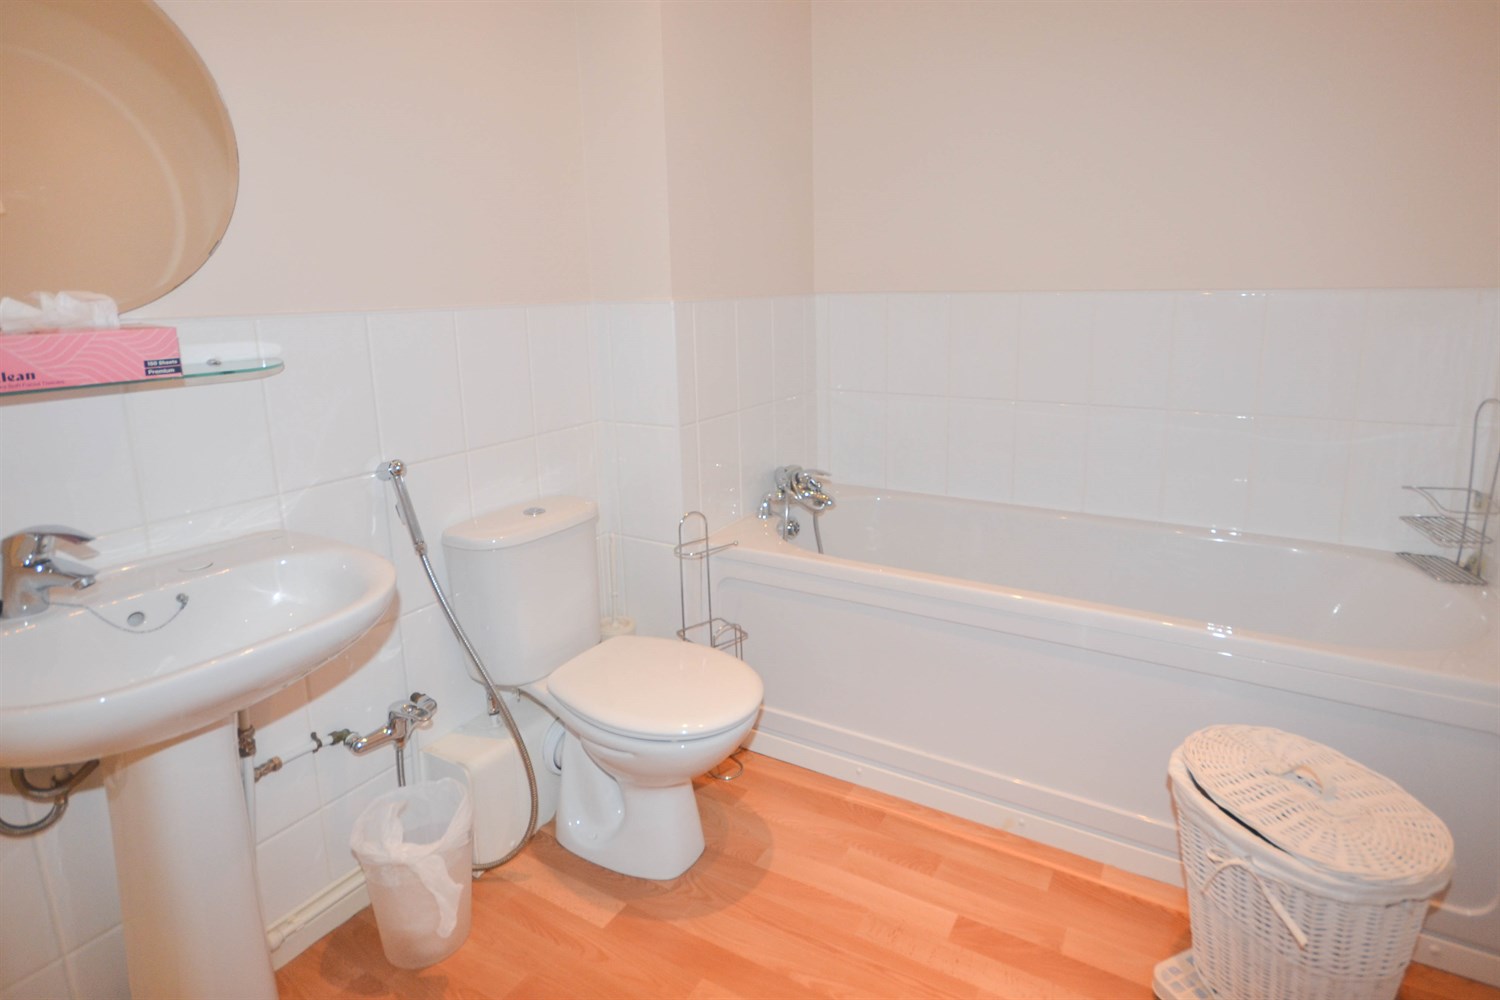 4 bed mid terraced town house for sale in Boldon, Tyne & Wear  - Property Image 6